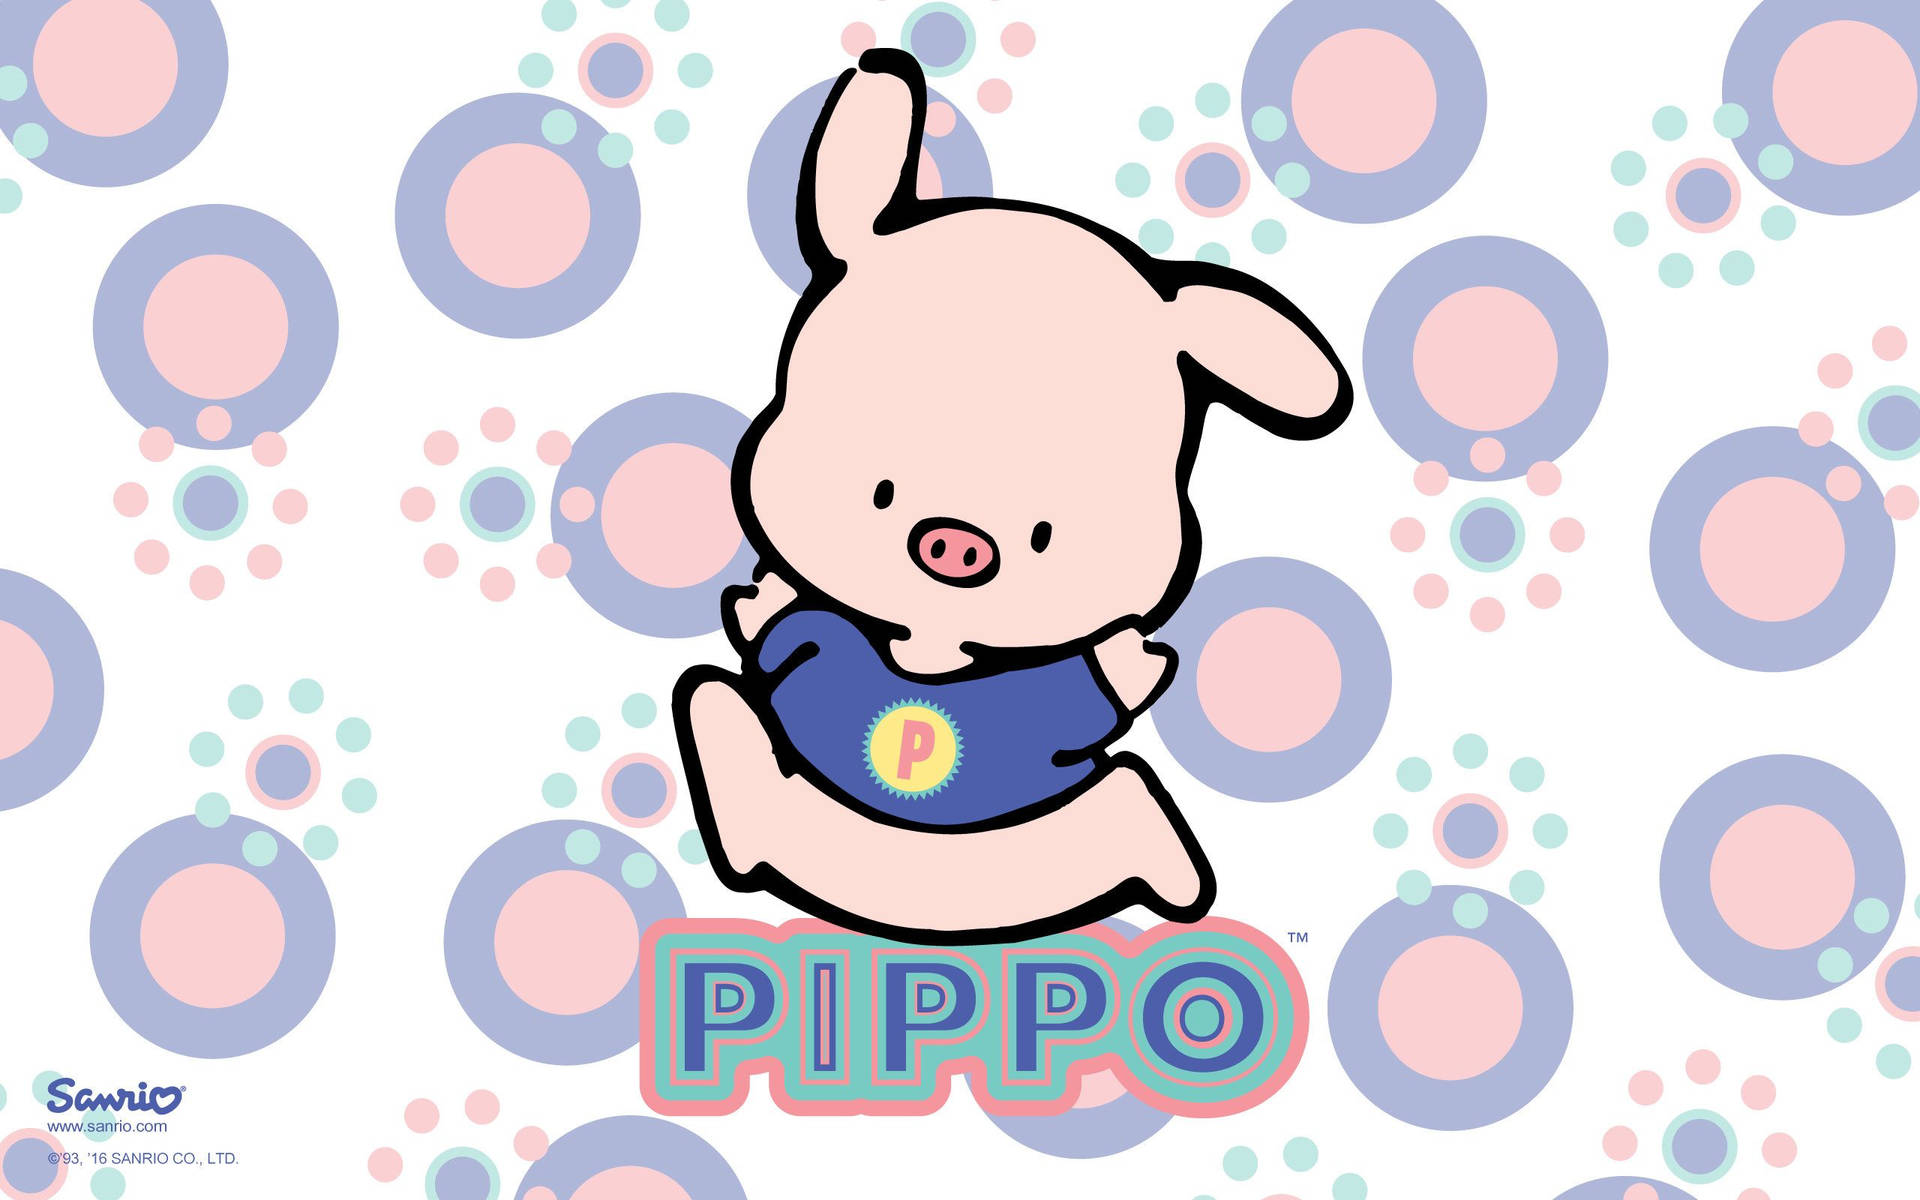 Celebrate Every Day With Cute Pippo From Sanrio! Background